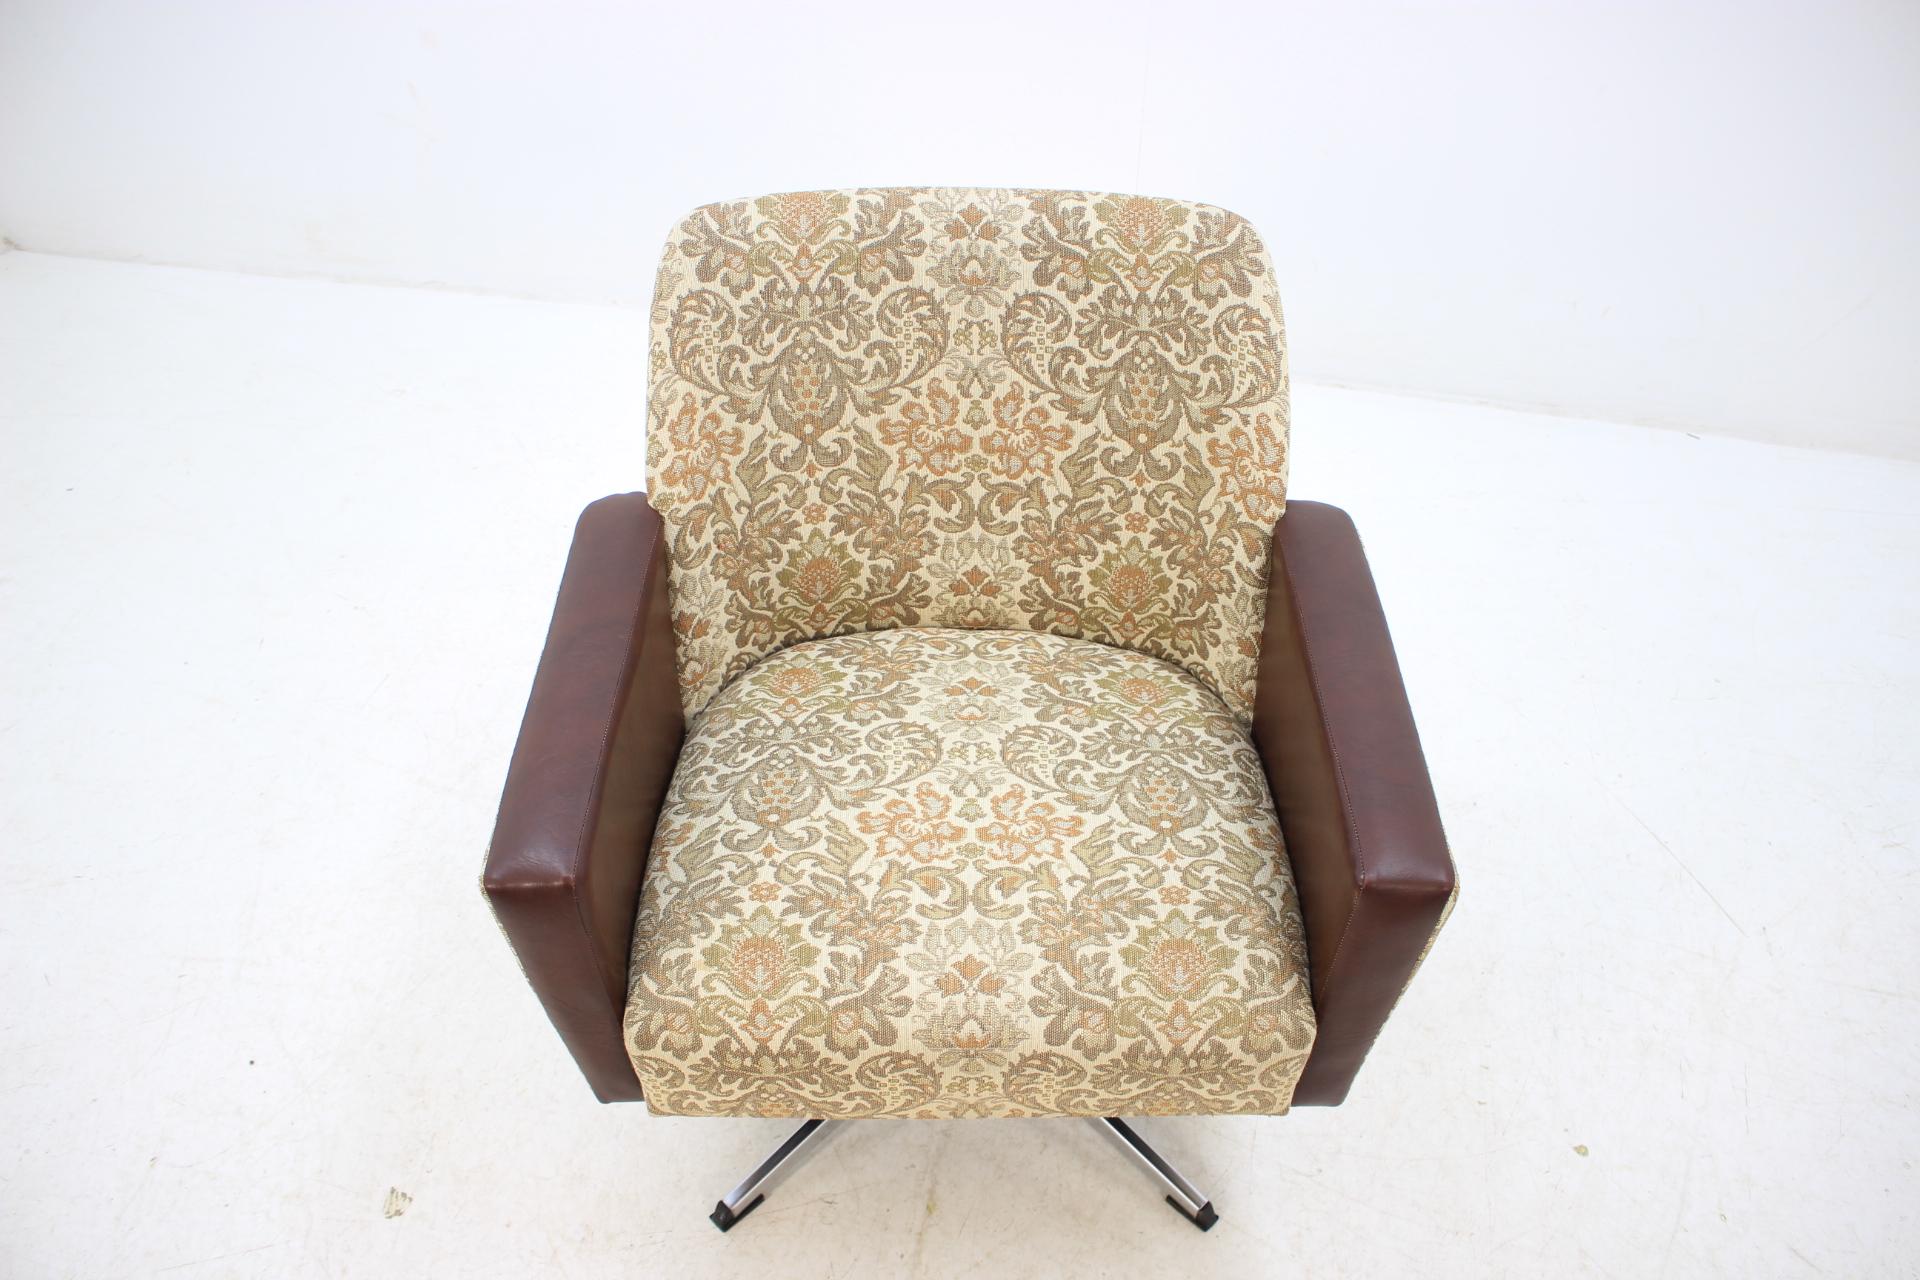 Metal Midcentury Swivel Chairs, 1970s For Sale